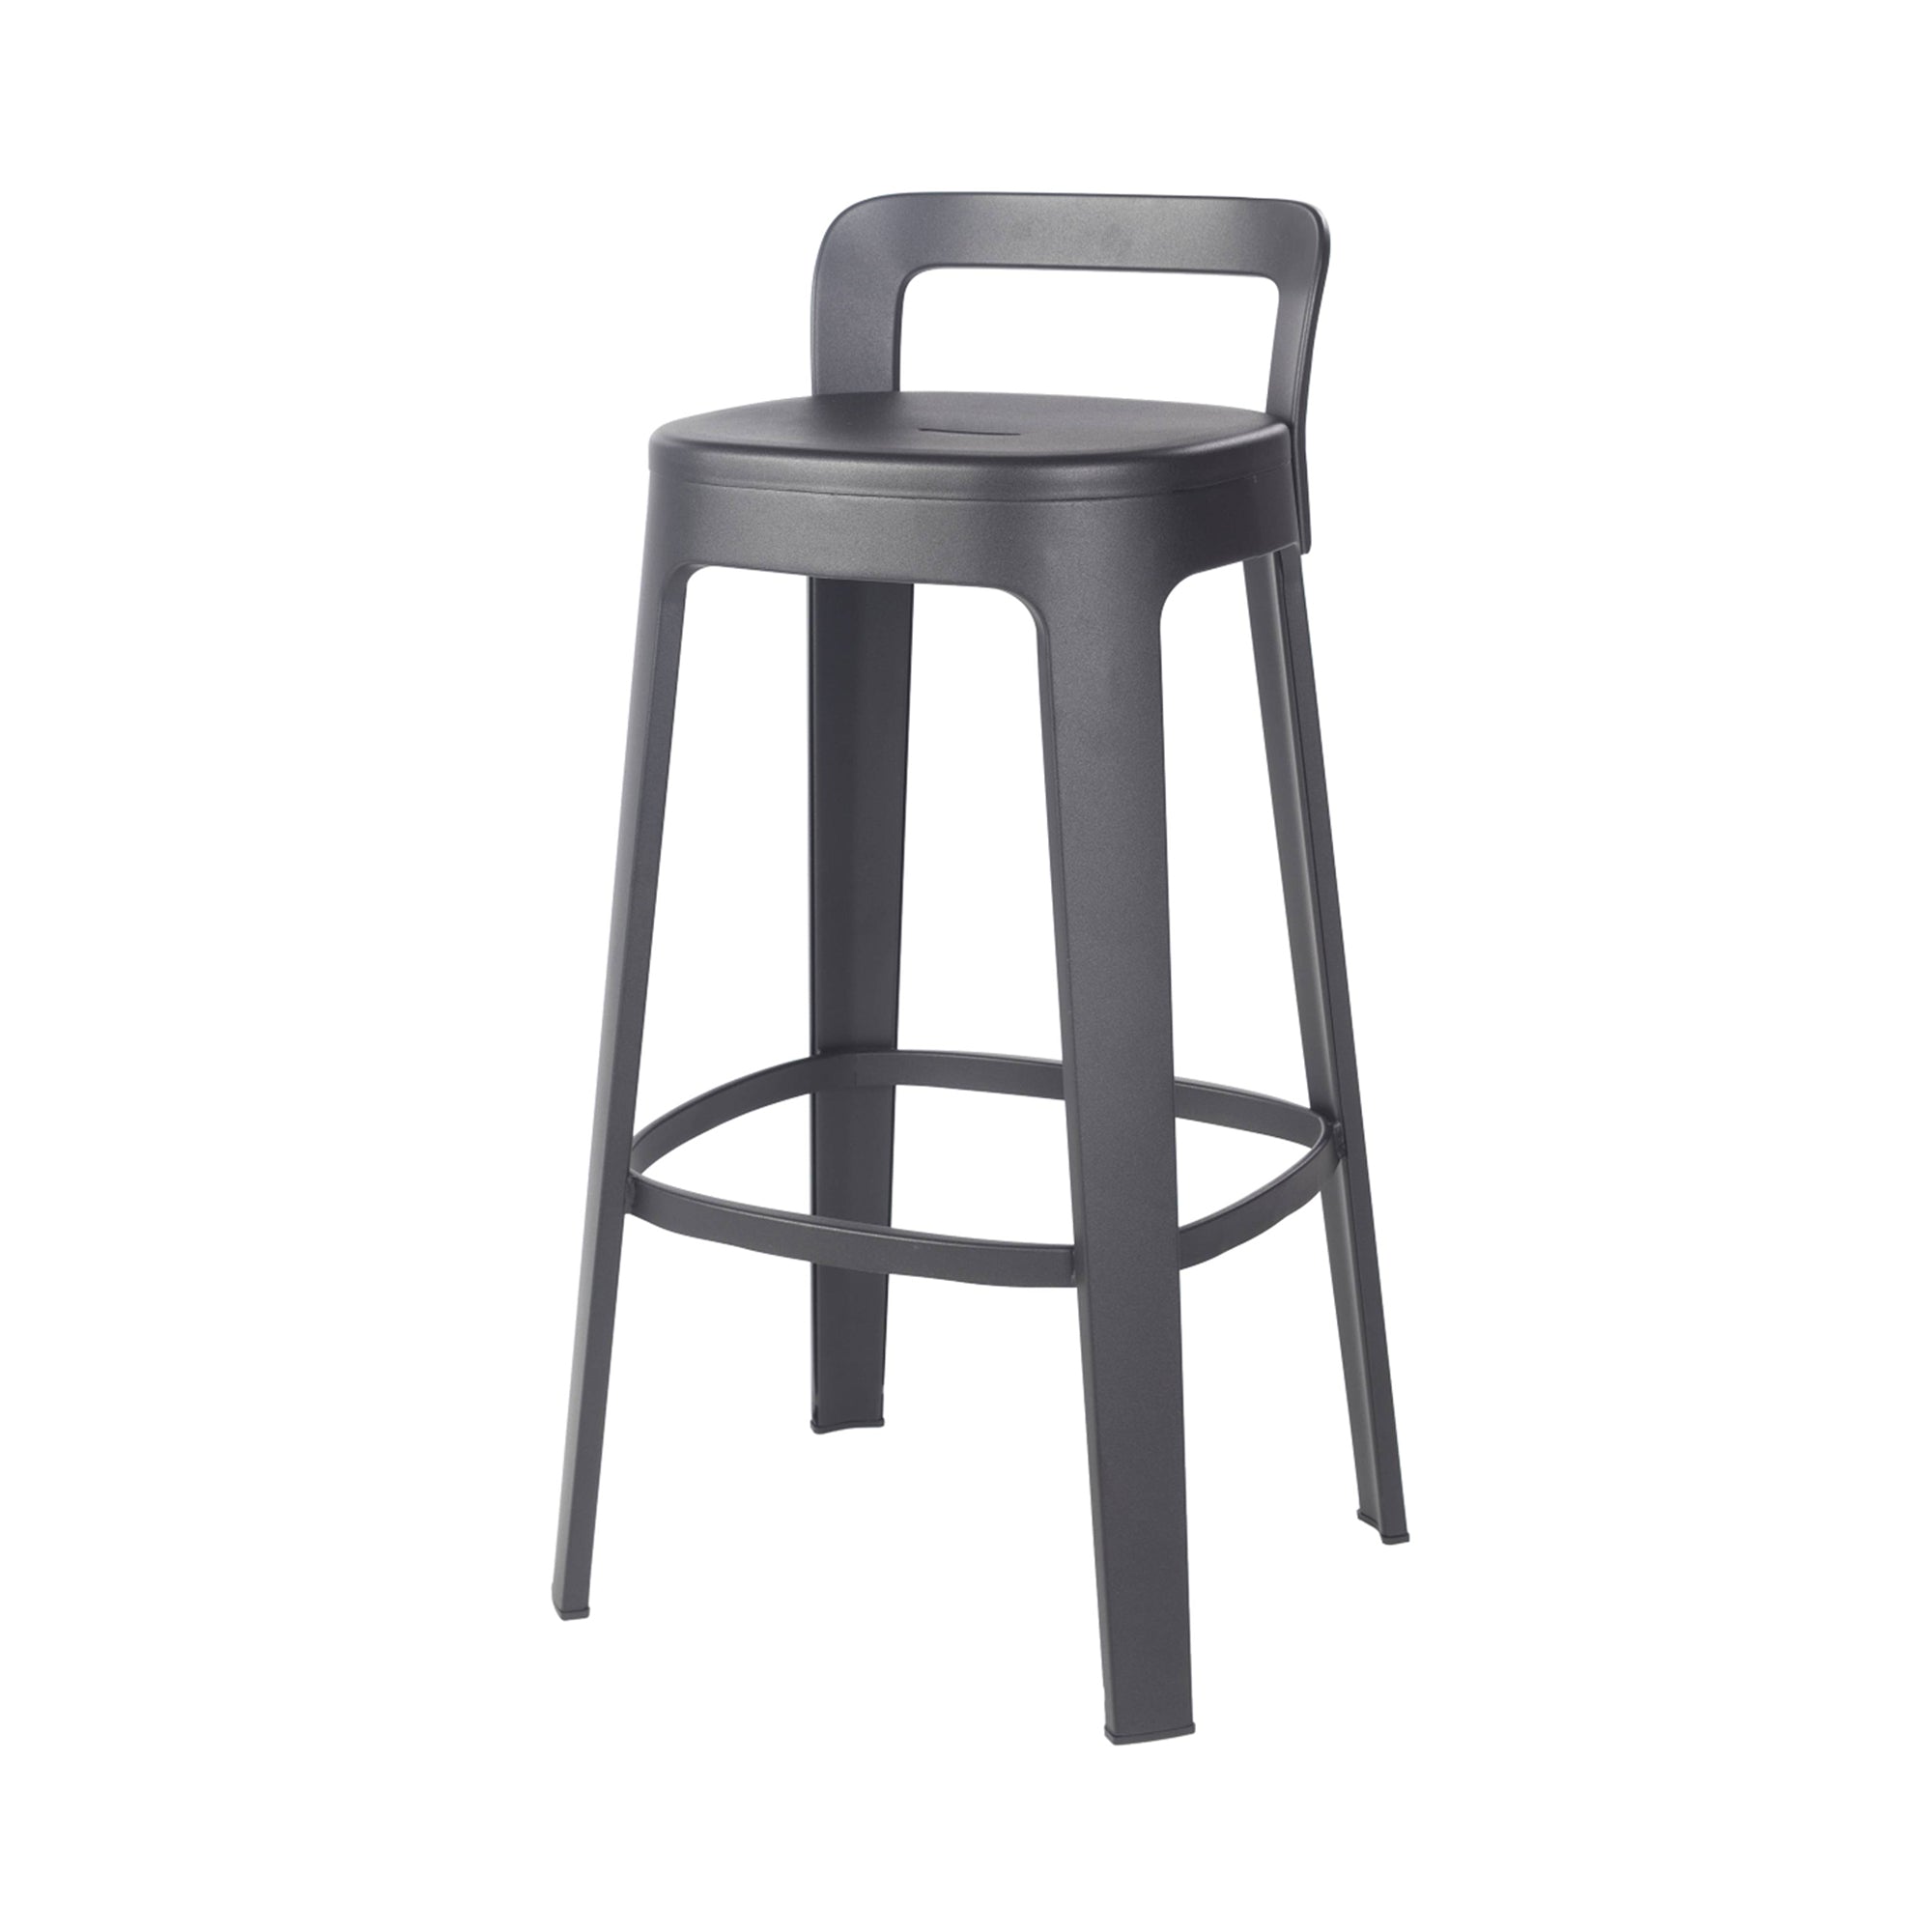 Ombra Bar + Counter Stool with Backrest: Bar + Black